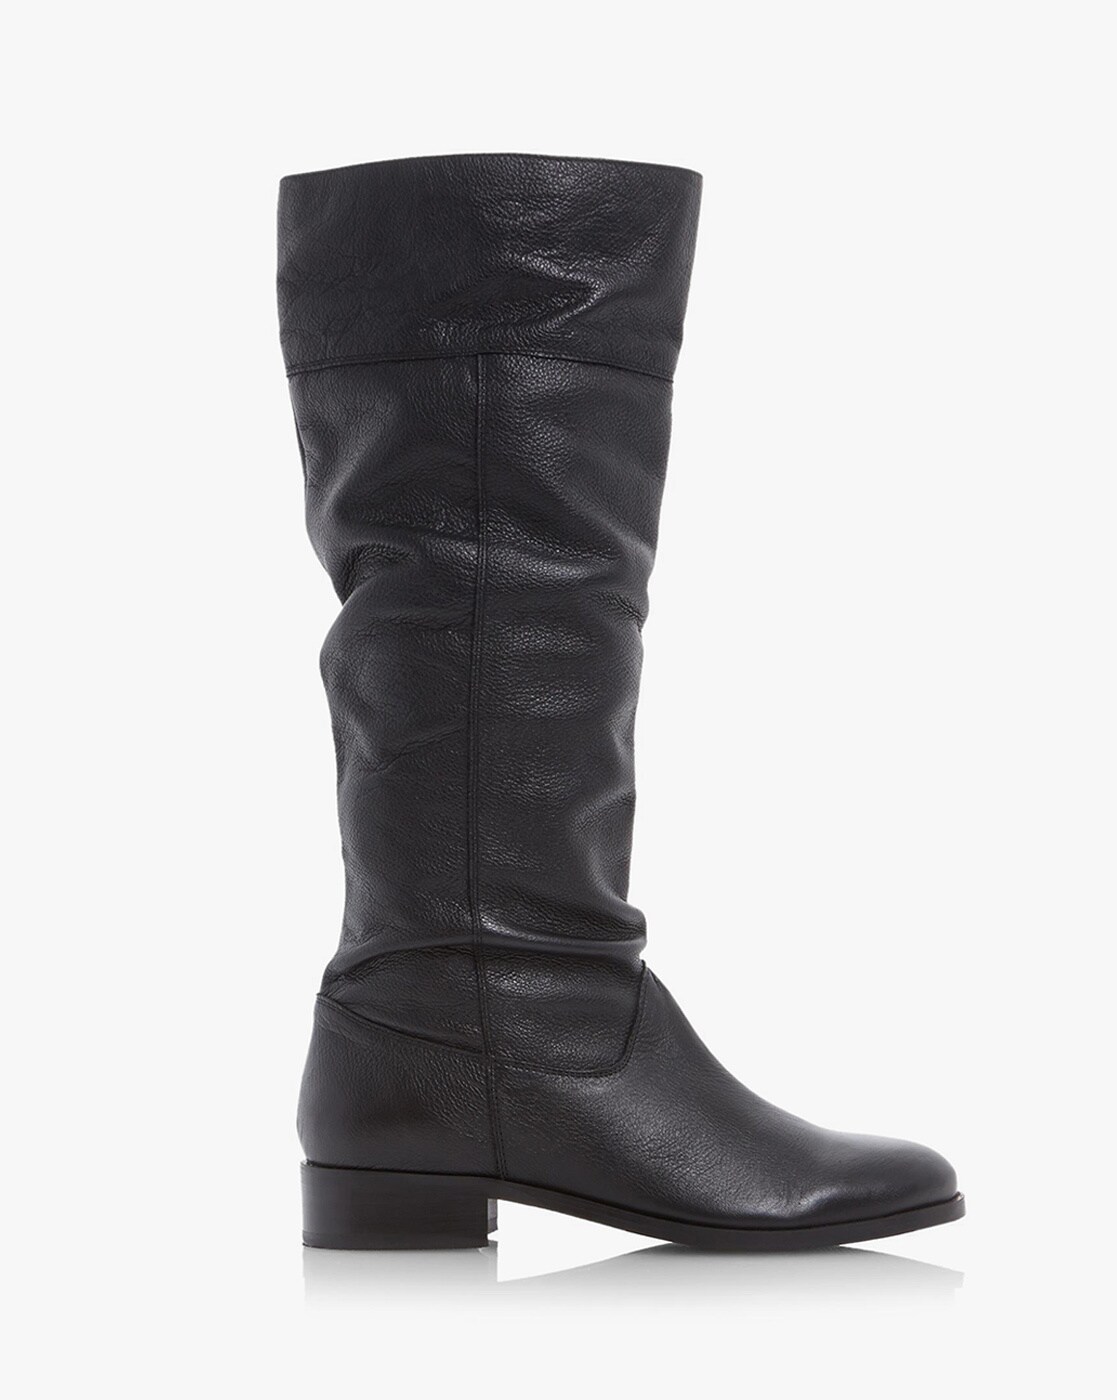 Boots for Women by Dune London 